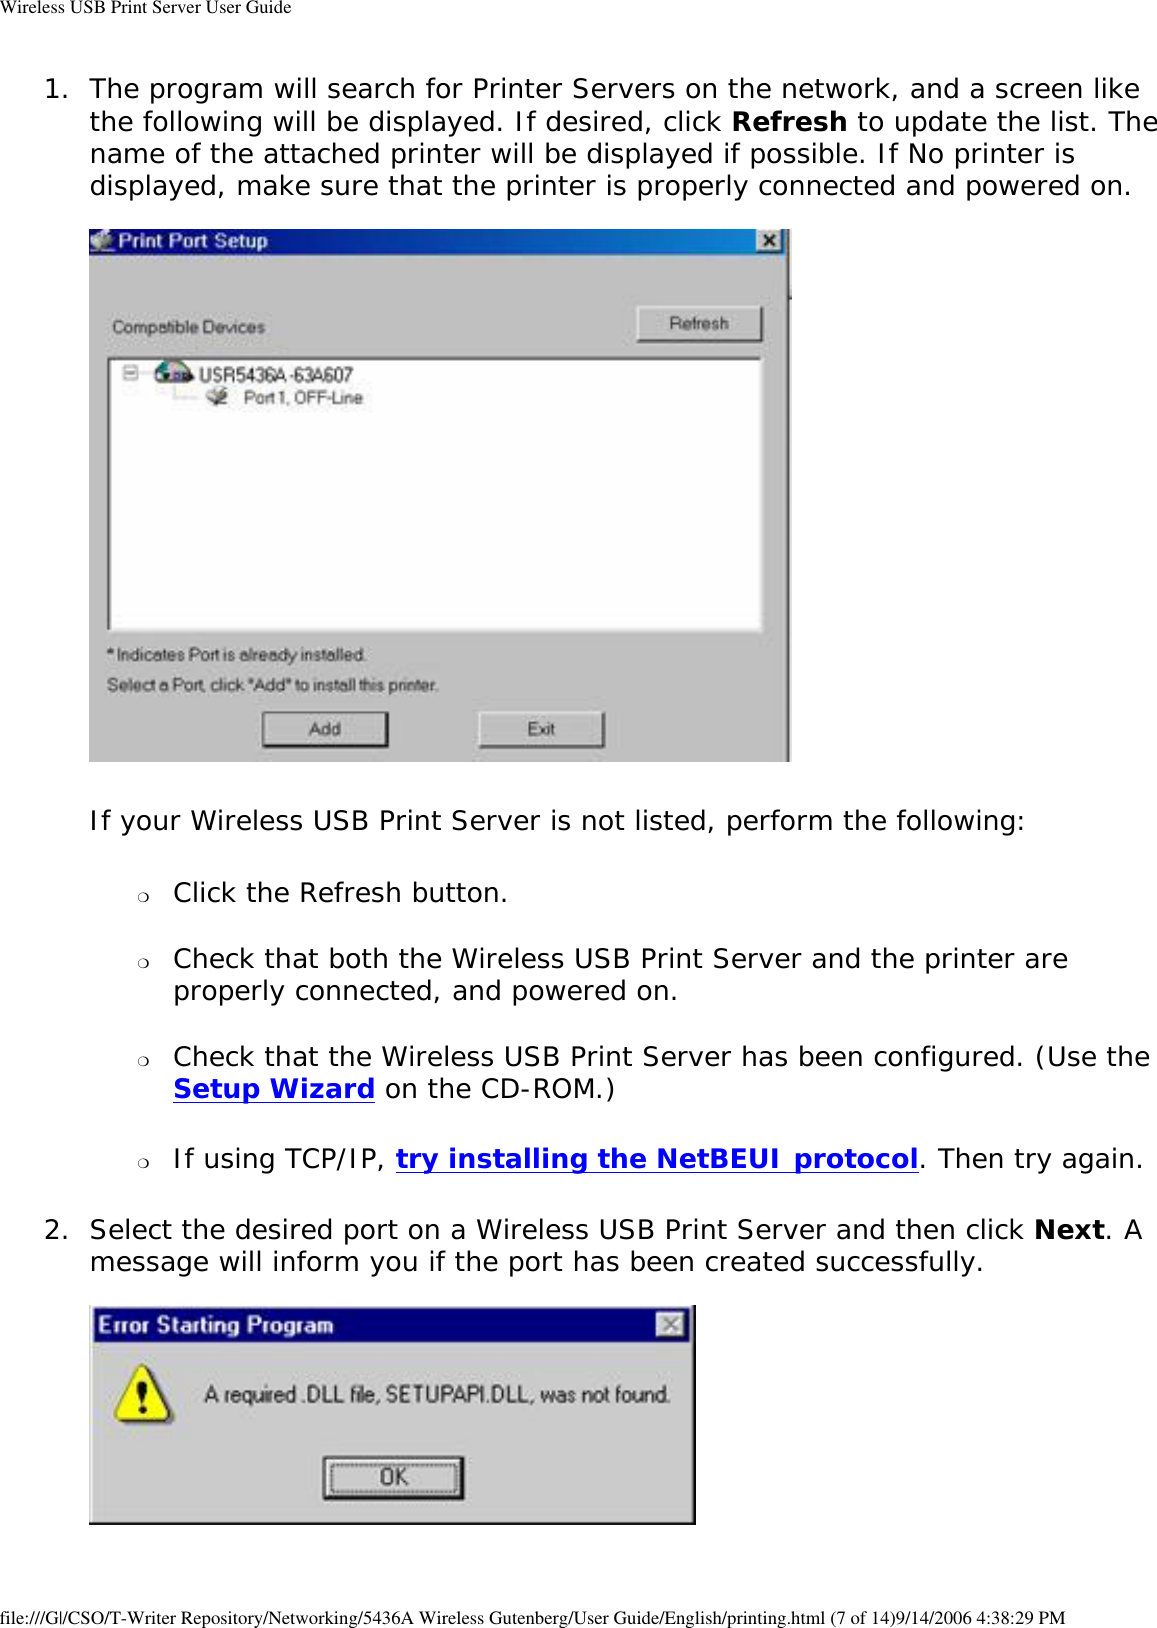 Wireless USB Print Server User Guide1.  The program will search for Printer Servers on the network, and a screen like the following will be displayed. If desired, click Refresh to update the list. The name of the attached printer will be displayed if possible. If No printer is displayed, make sure that the printer is properly connected and powered on.    If your Wireless USB Print Server is not listed, perform the following:❍     Click the Refresh button. ❍     Check that both the Wireless USB Print Server and the printer are properly connected, and powered on. ❍     Check that the Wireless USB Print Server has been configured. (Use the Setup Wizard on the CD-ROM.) ❍     If using TCP/IP, try installing the NetBEUI protocol. Then try again. 2.  Select the desired port on a Wireless USB Print Server and then click Next. A message will inform you if the port has been created successfully.     file:///G|/CSO/T-Writer Repository/Networking/5436A Wireless Gutenberg/User Guide/English/printing.html (7 of 14)9/14/2006 4:38:29 PM